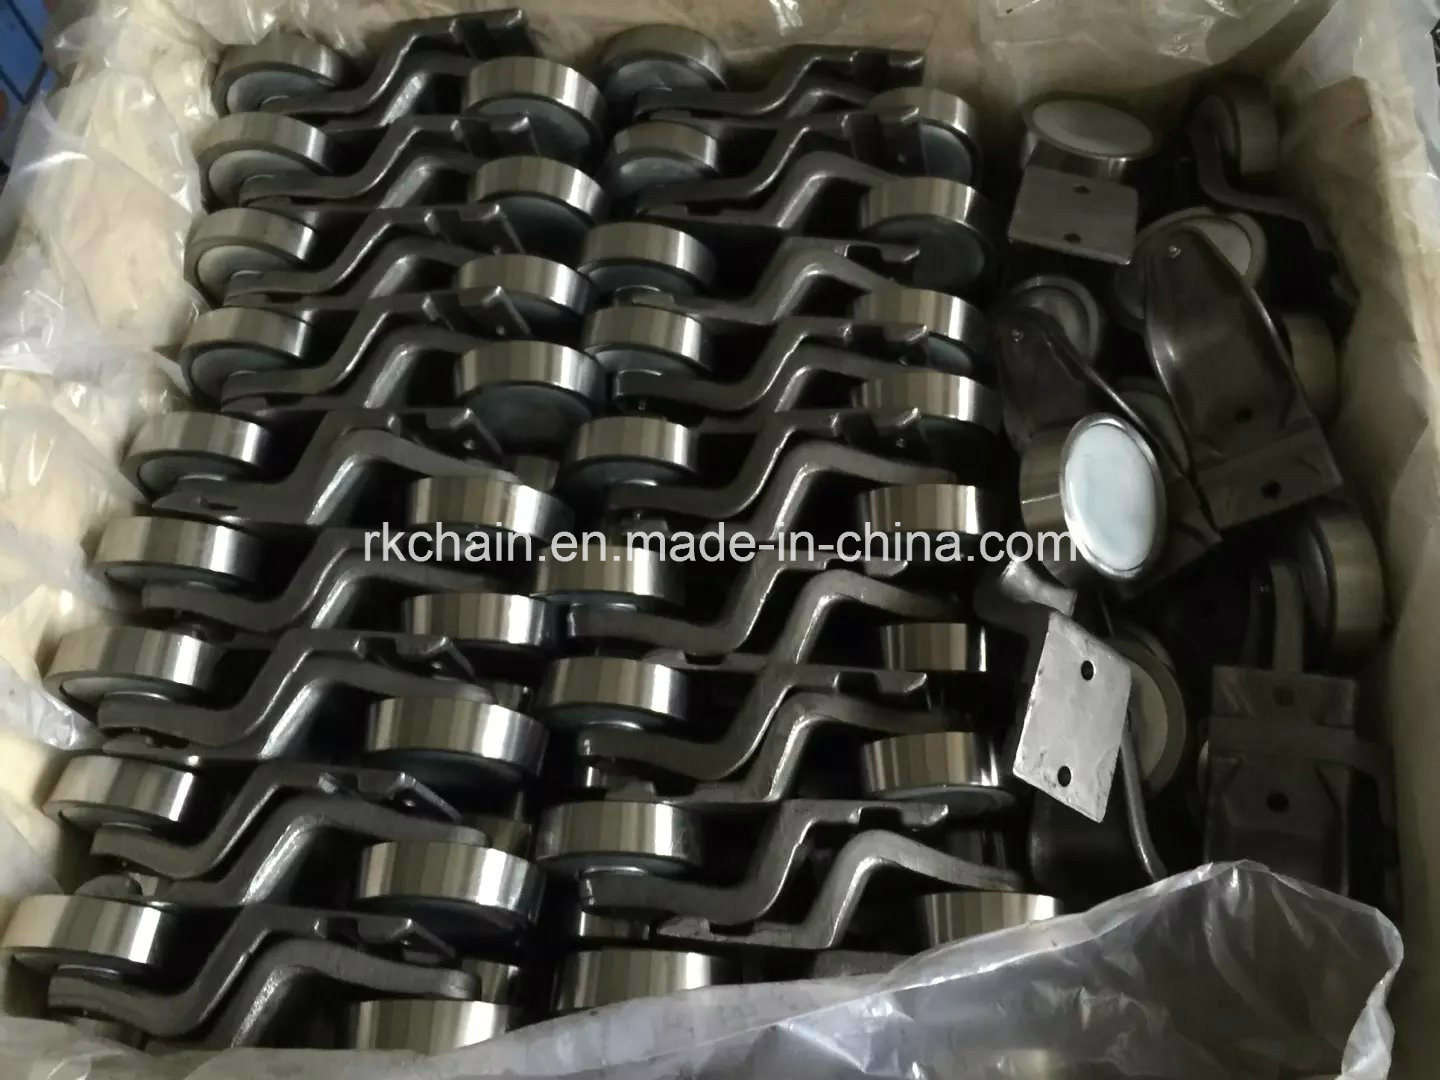 Suspension Chain Trolley of I Beam Rail Conveying System